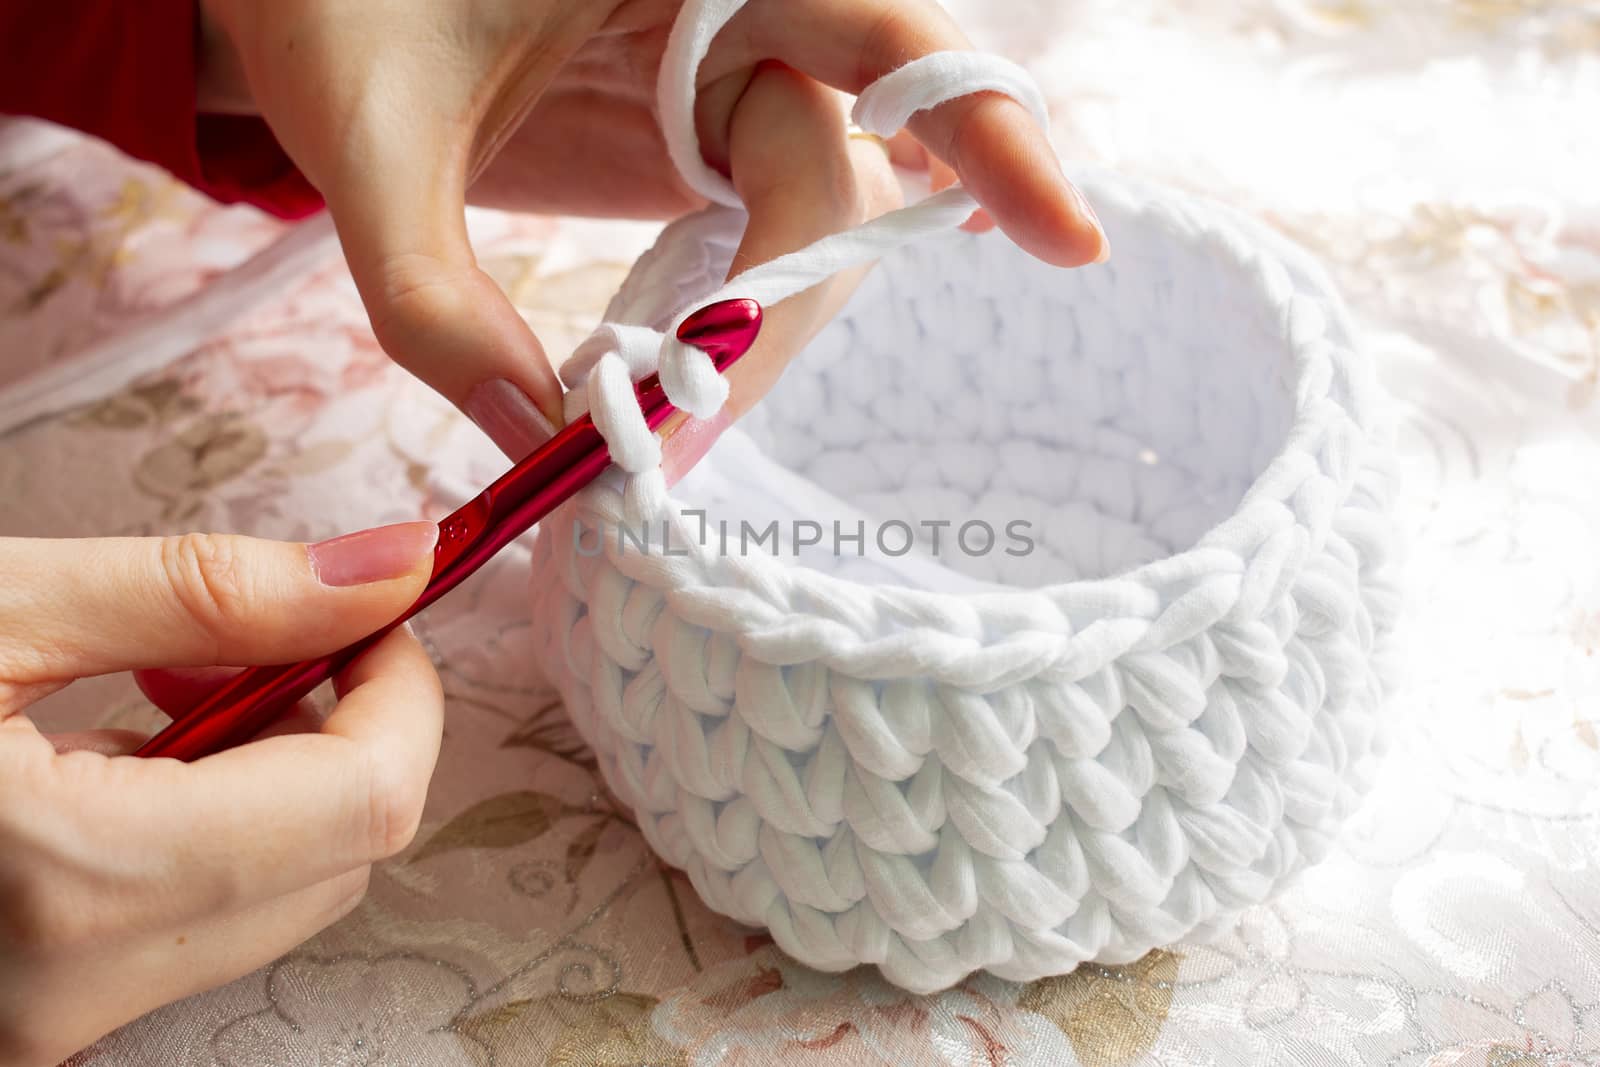 Young woman while crocheting on a patterned tablecloth, close up. Stay at home leisure activity idea. Basket made of white T-shirt yarn, with red crochet needle. Pale pink nails.